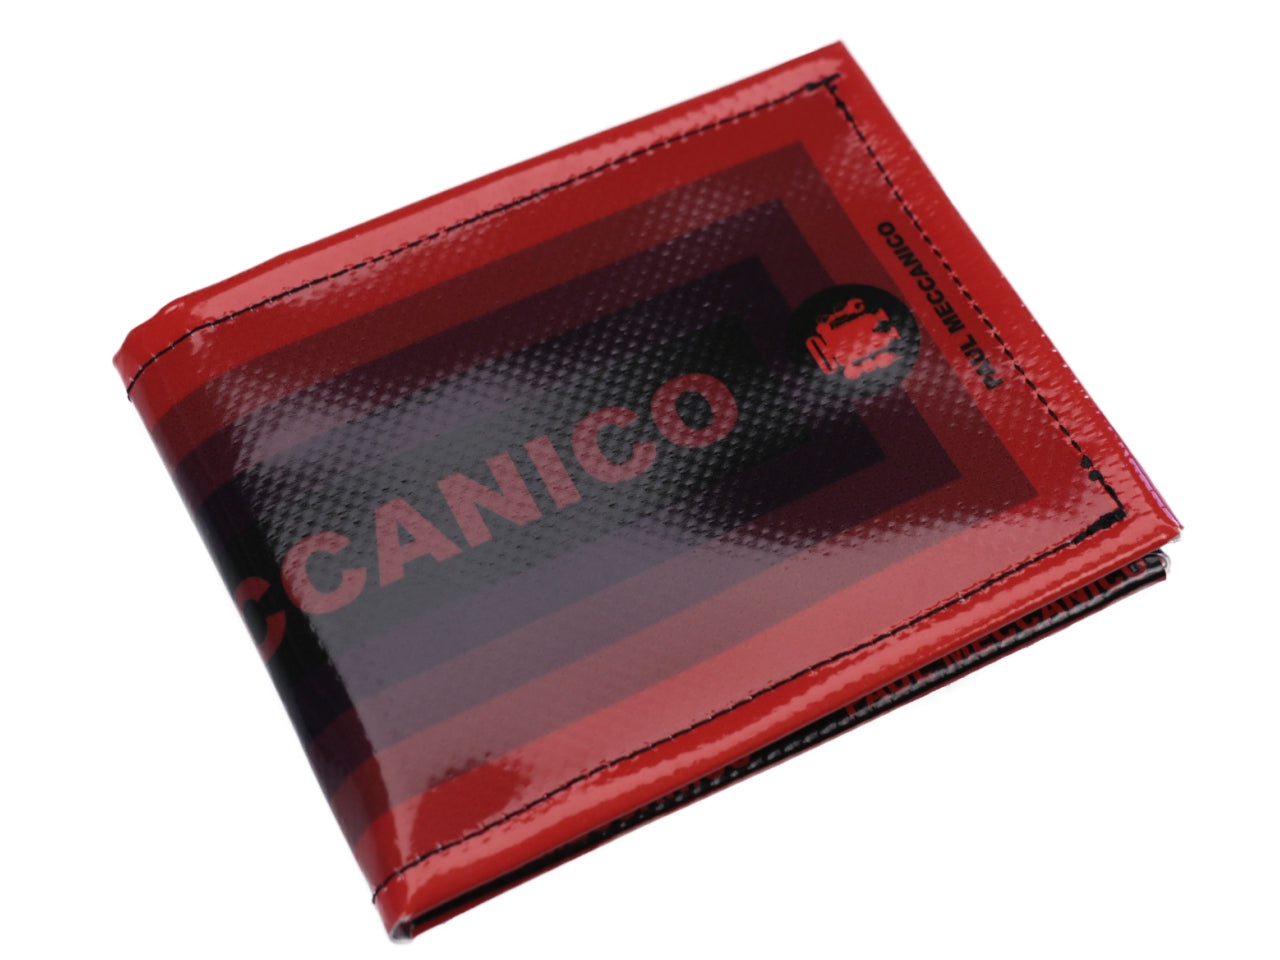 MEN'S WALLET RED. MODEL CRIK MADE OF LORRY TARPAULIN. - Limited Edition Paul Meccanico